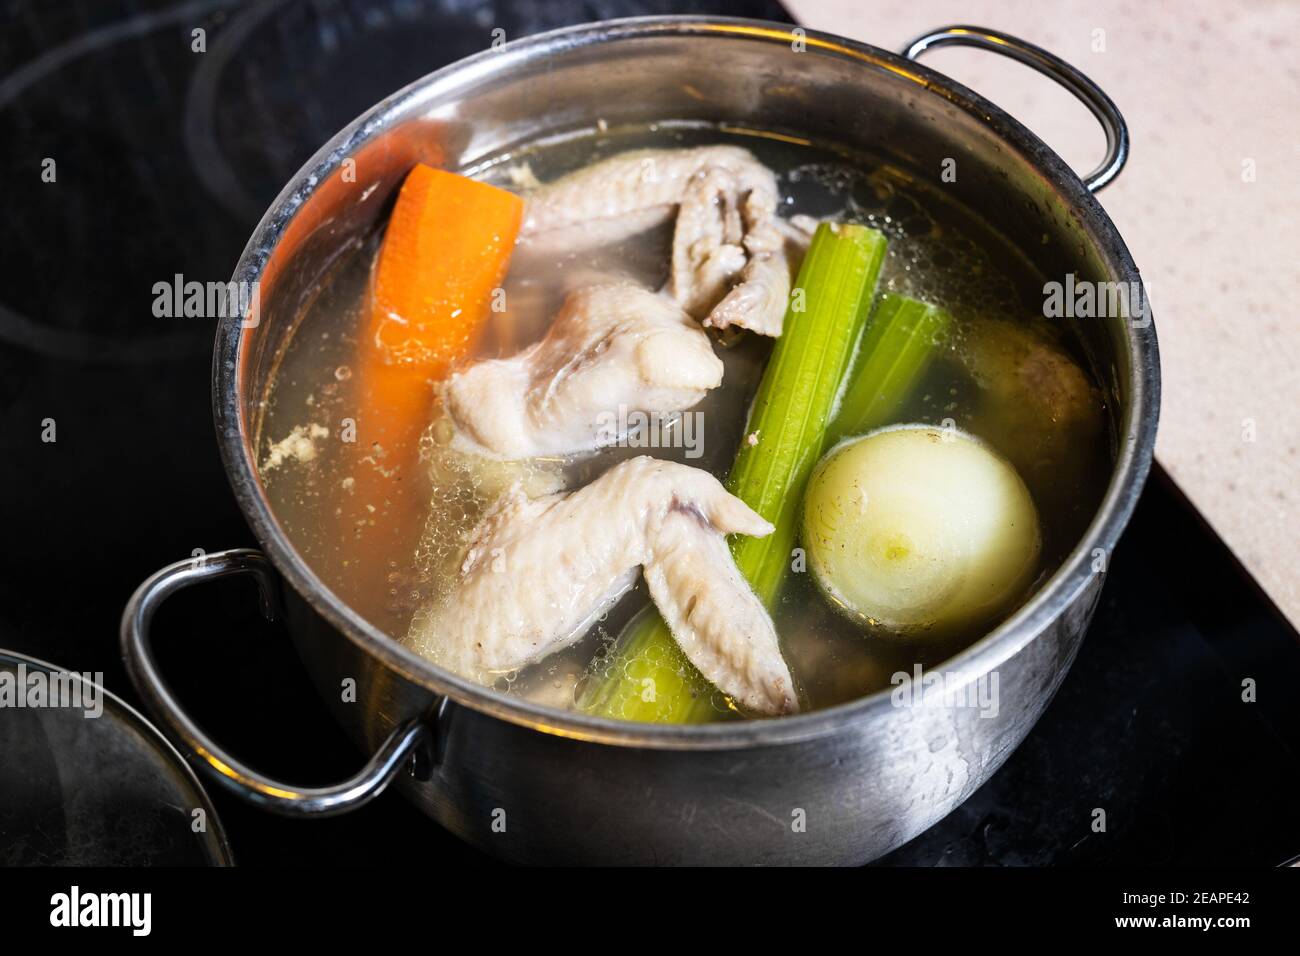 chicken wings soup is cooked in steel stewpot Stock Photo